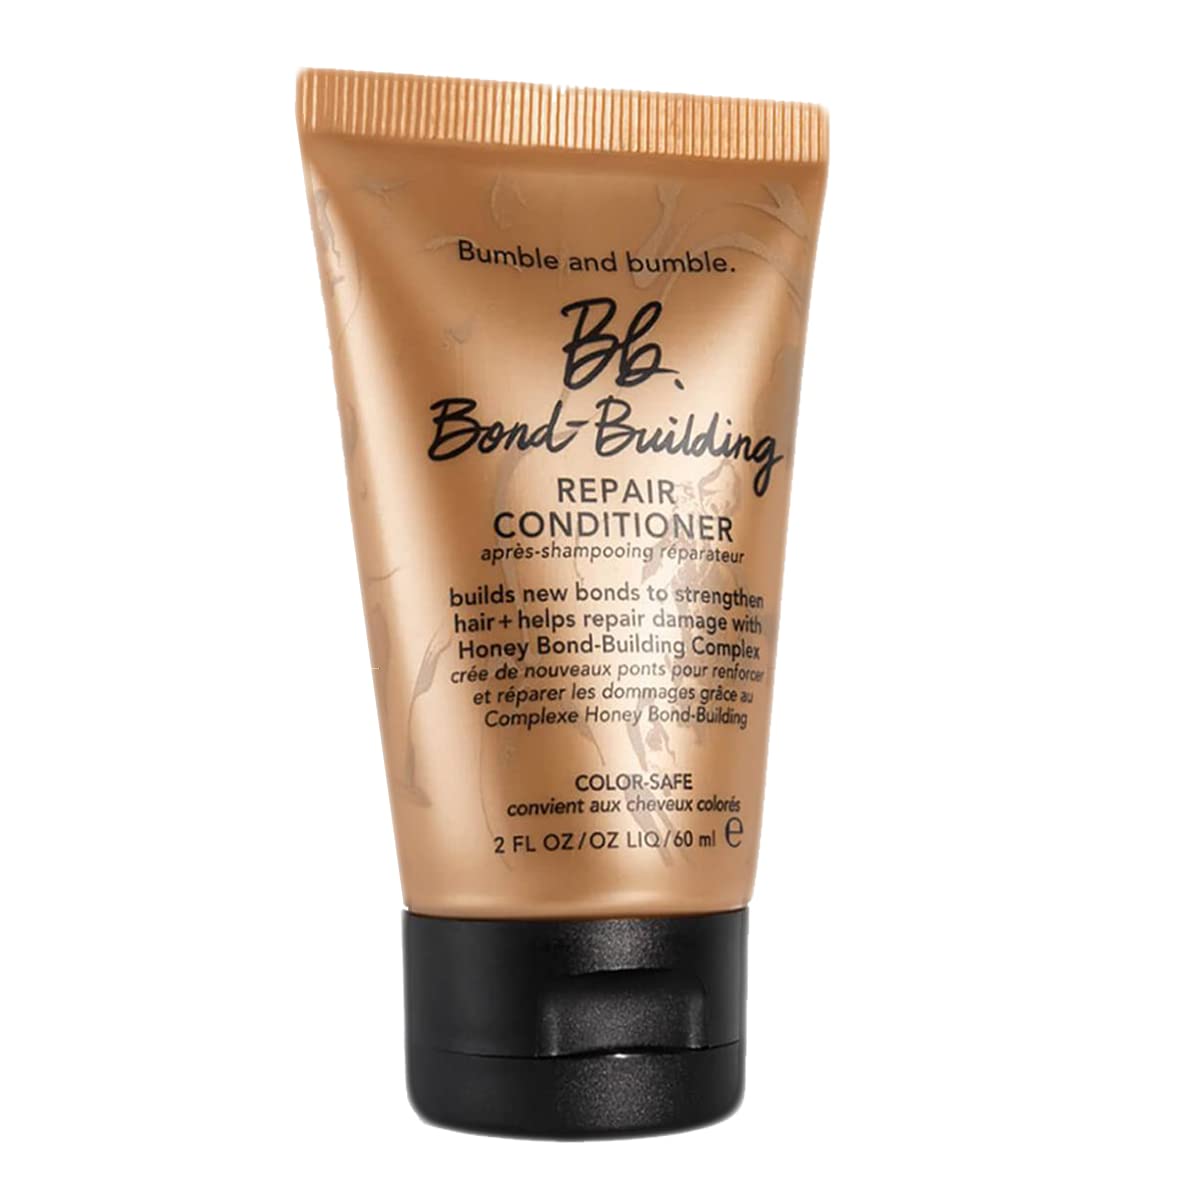 Bumble and Bumble Bond Building Repair Conditioner 2oz/60ml TRAVEL SIZE